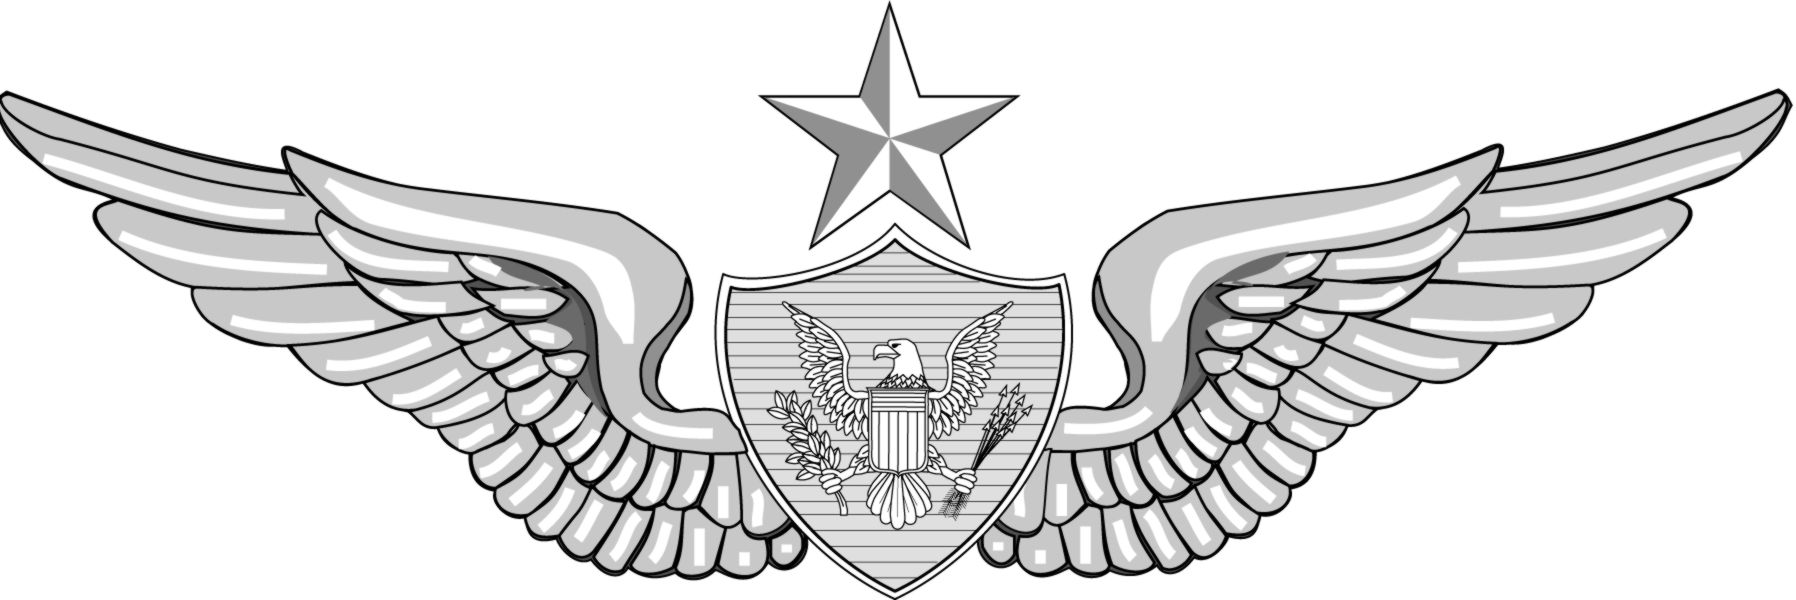 military badges clipart - photo #6